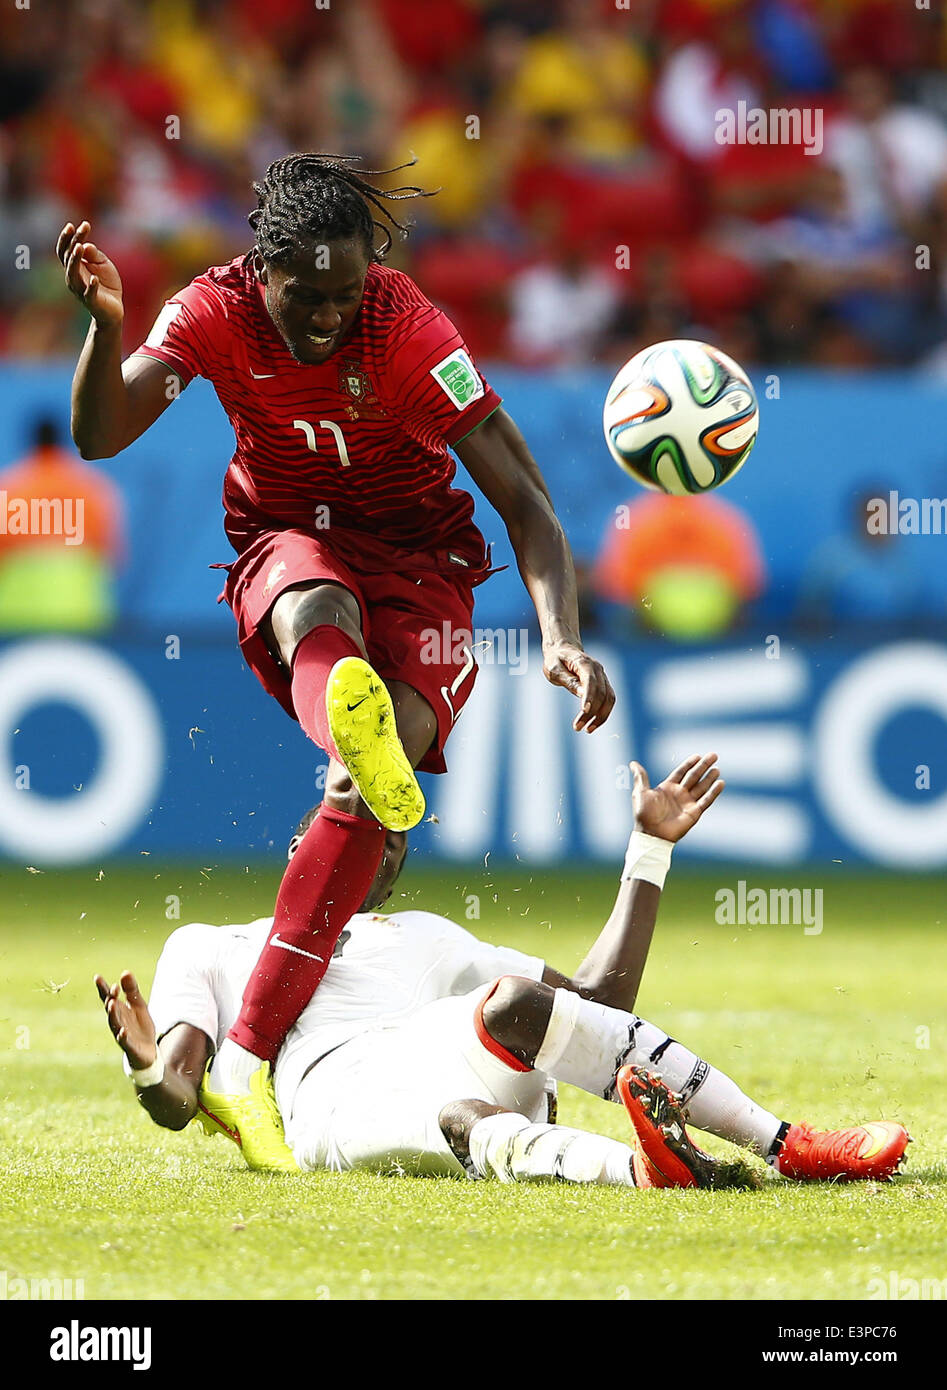 Brasilia, Brazil. 26th June, 2014. Portugal's Eder (up) passes the ball during a Group G match between Portugal and Ghana of 2014 FIFA World Cup at the Estadio Nacional Stadium in Brasilia, Brazil, June 26, 2014. Credit:  Liu Bin/Xinhua/Alamy Live News Stock Photo